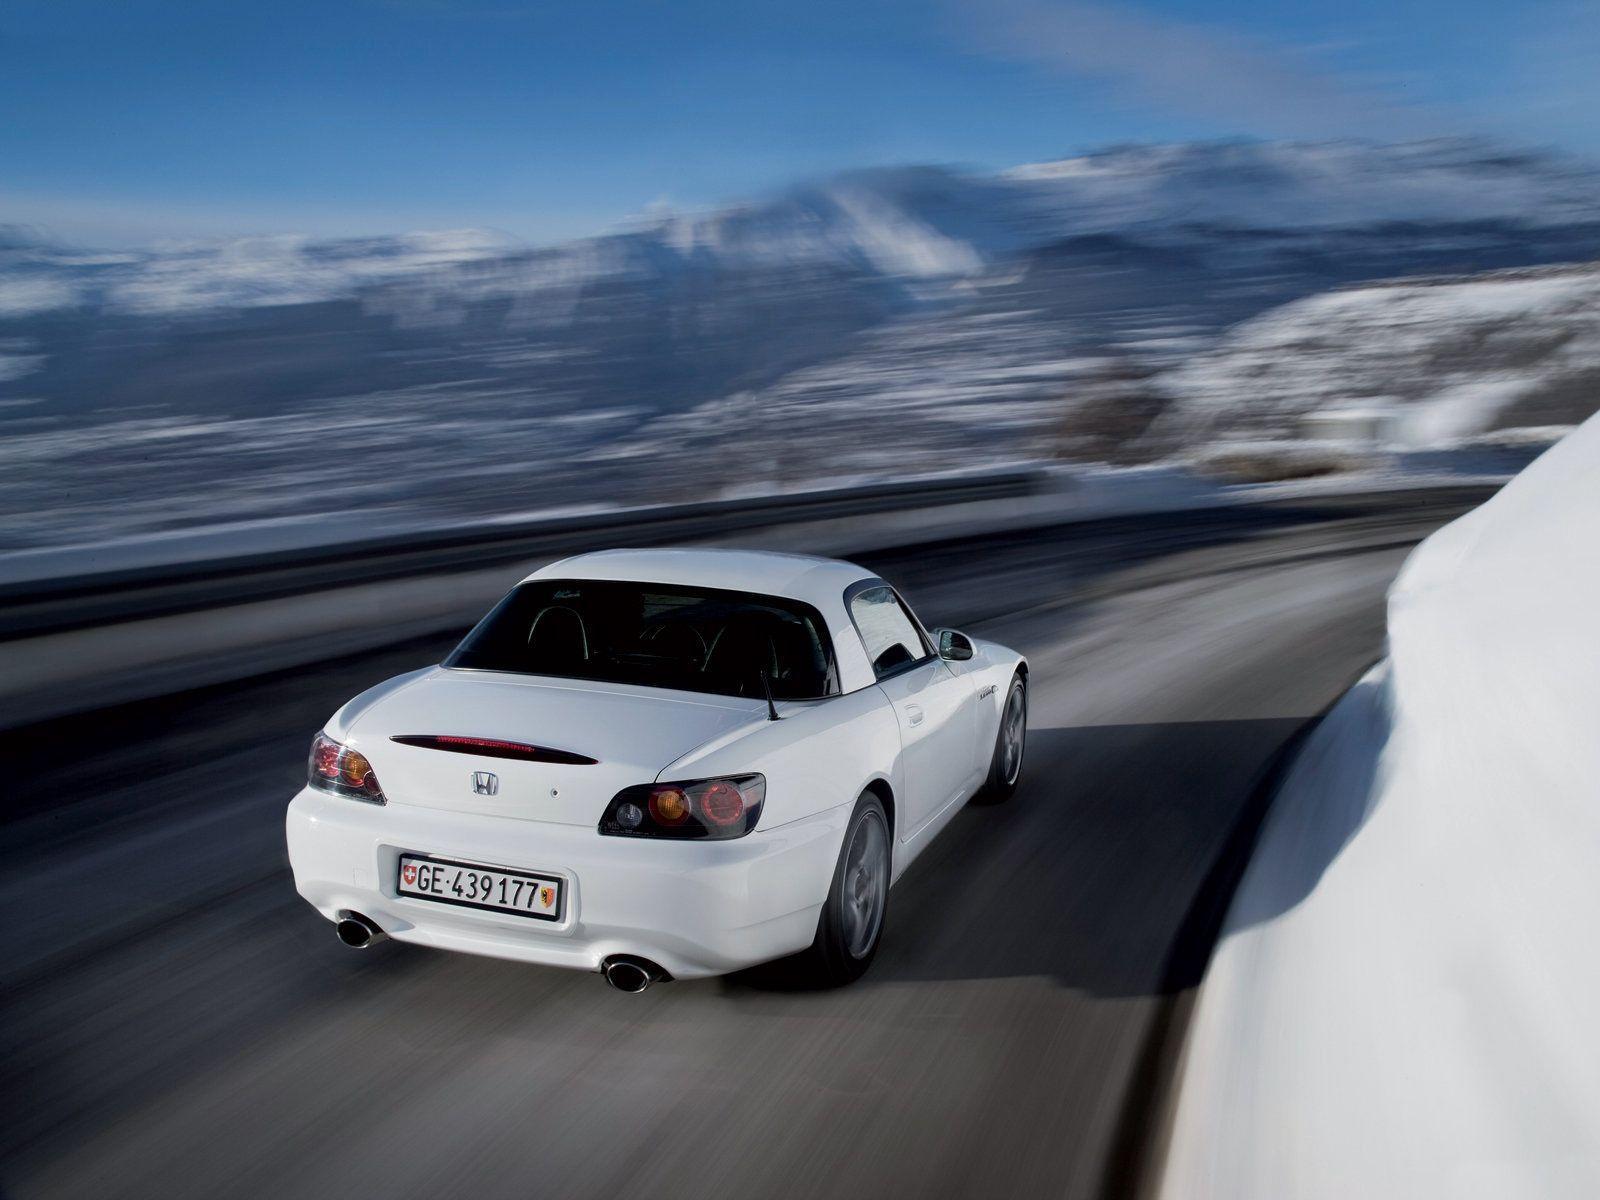 Honda S2000 Wallpaper For iPhone Free 13766. Best Cars Picture